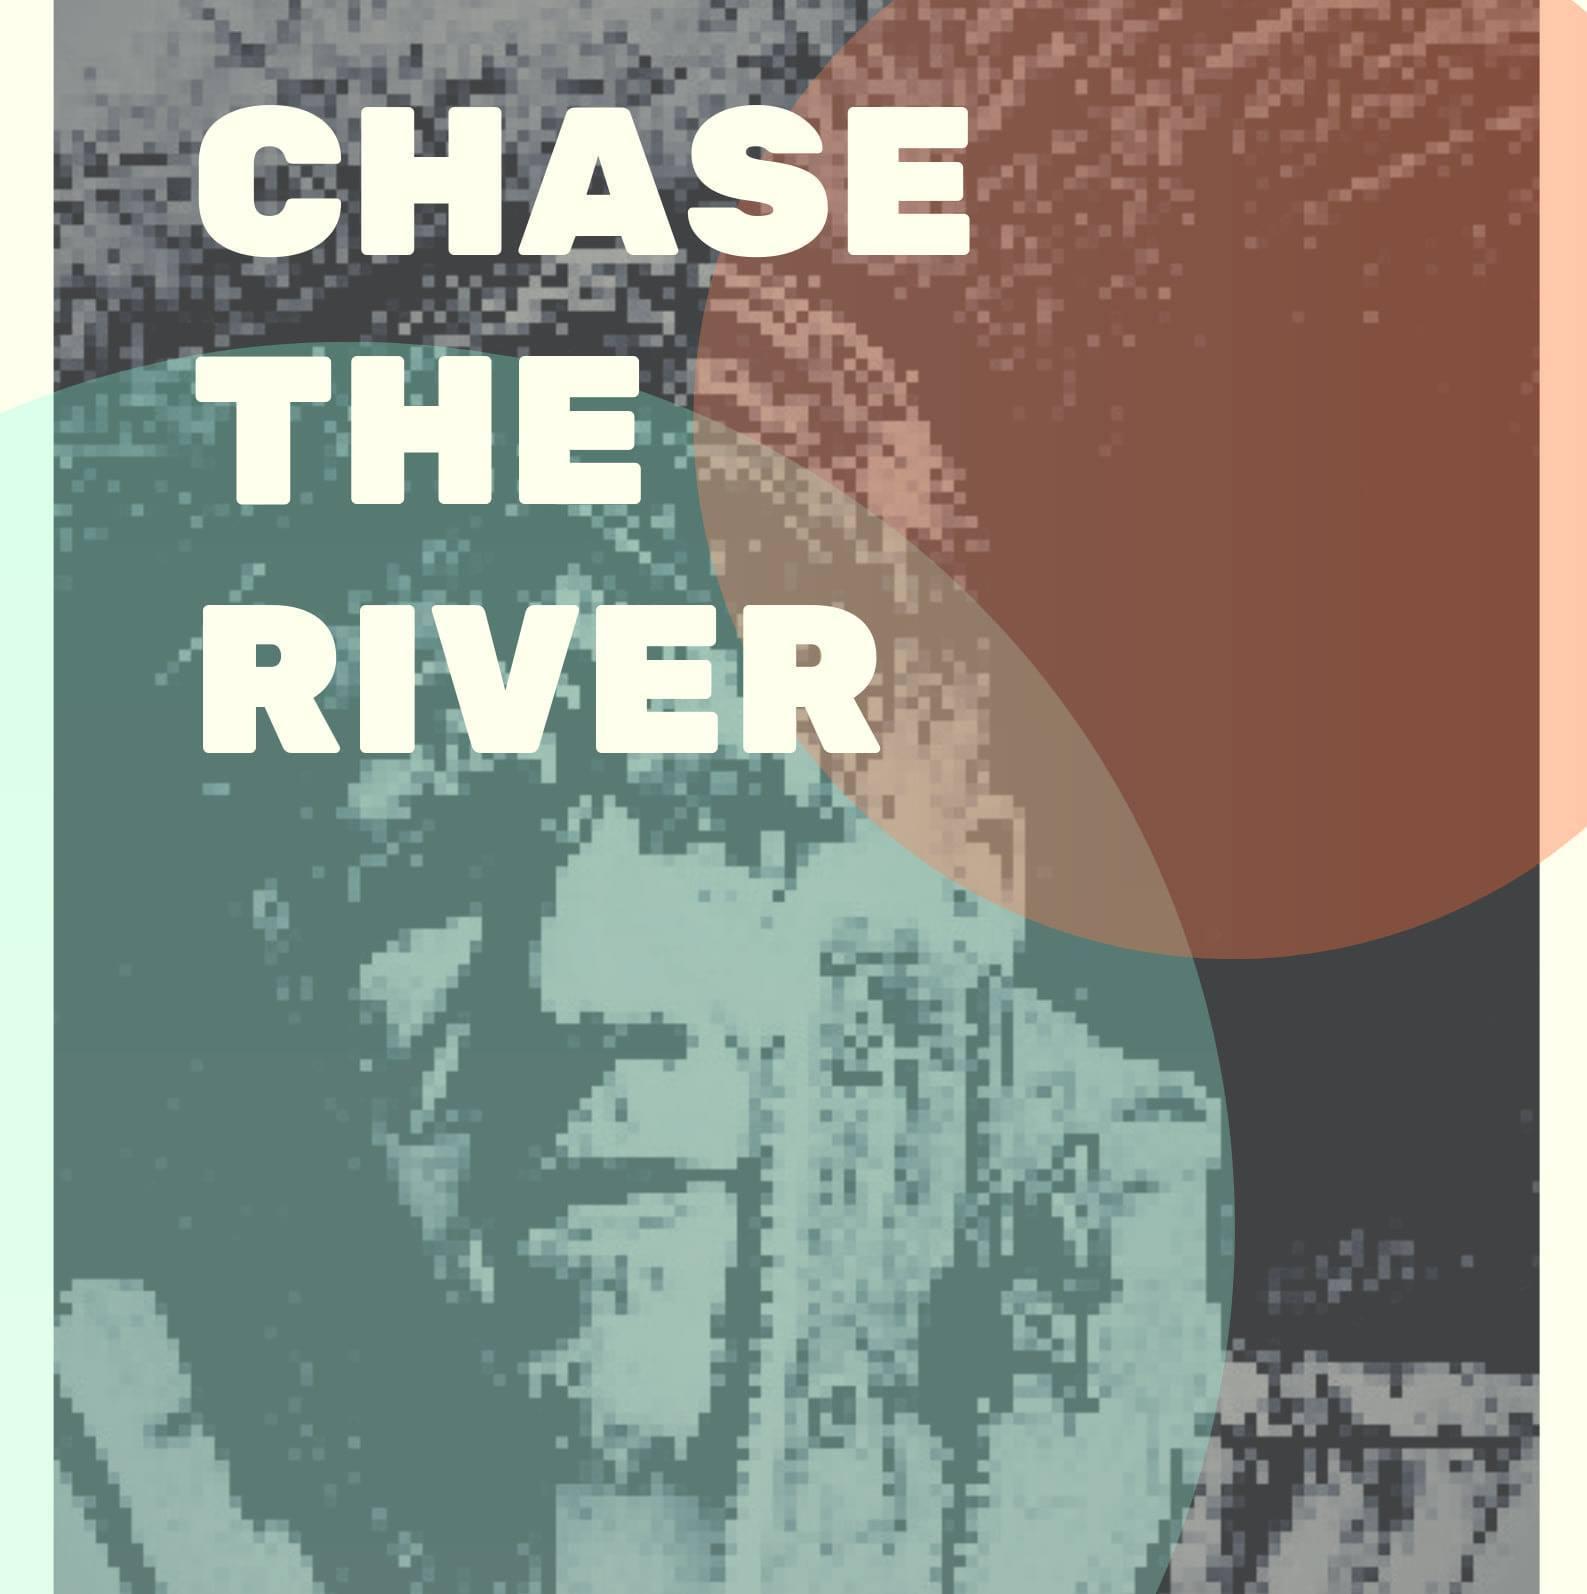 Chase The River